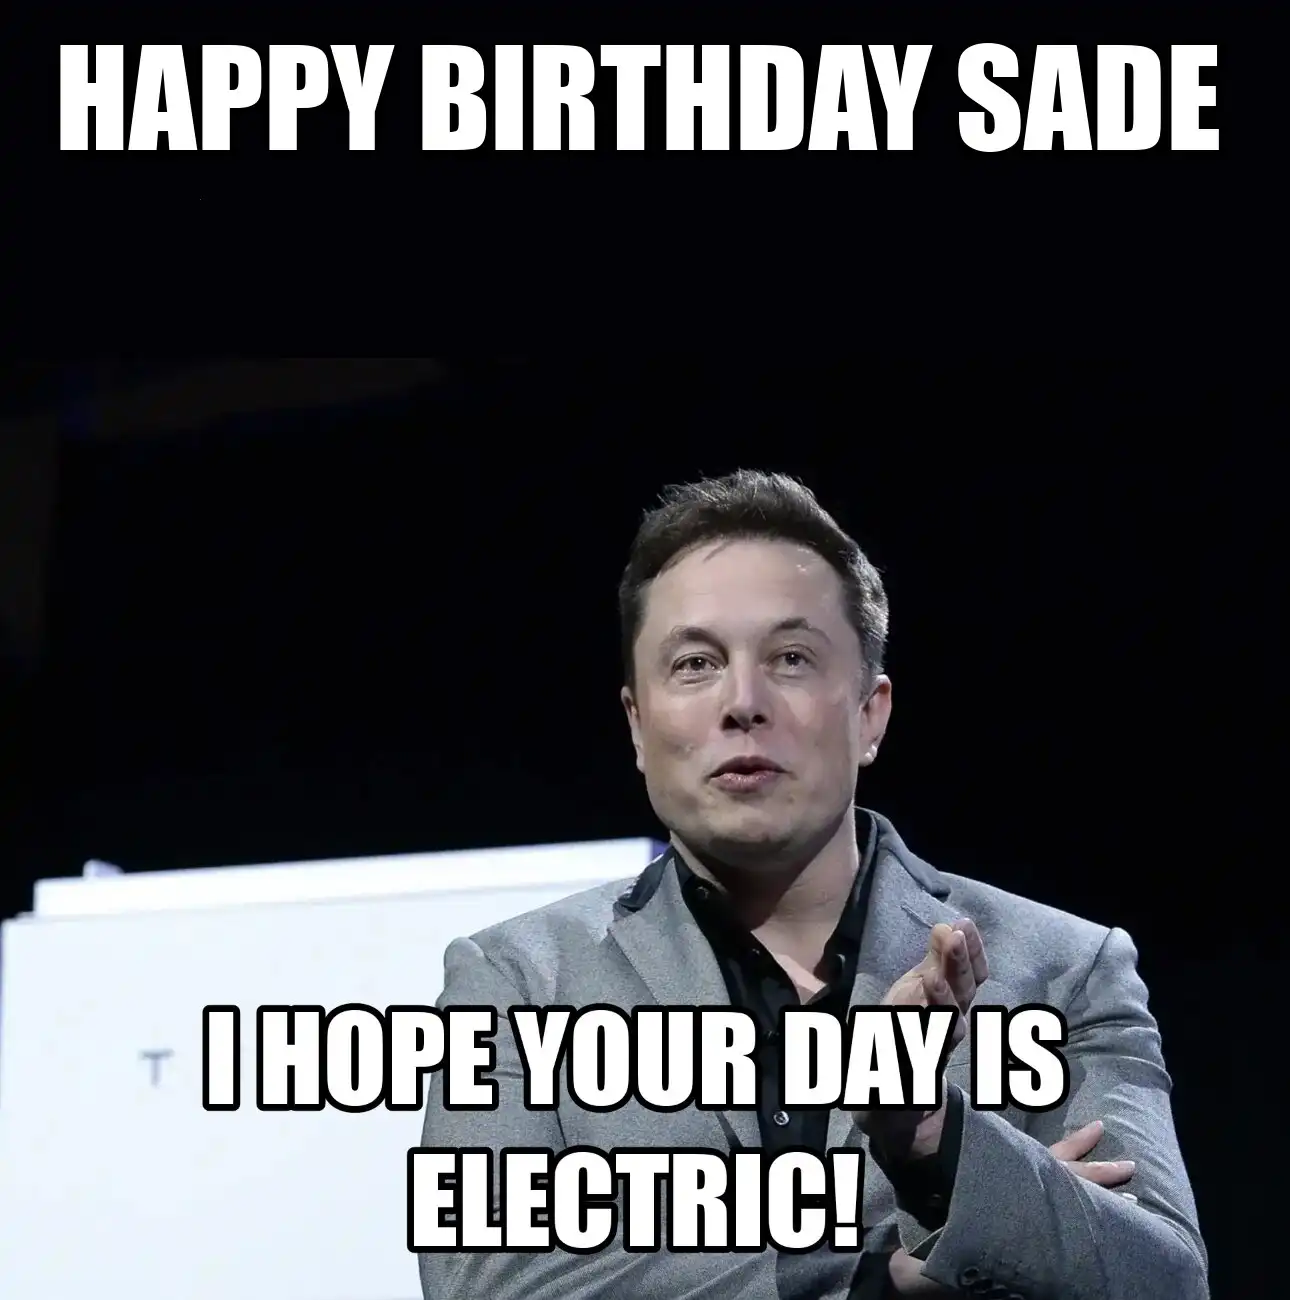 Happy Birthday Sade I Hope Your Day Is Electric Meme